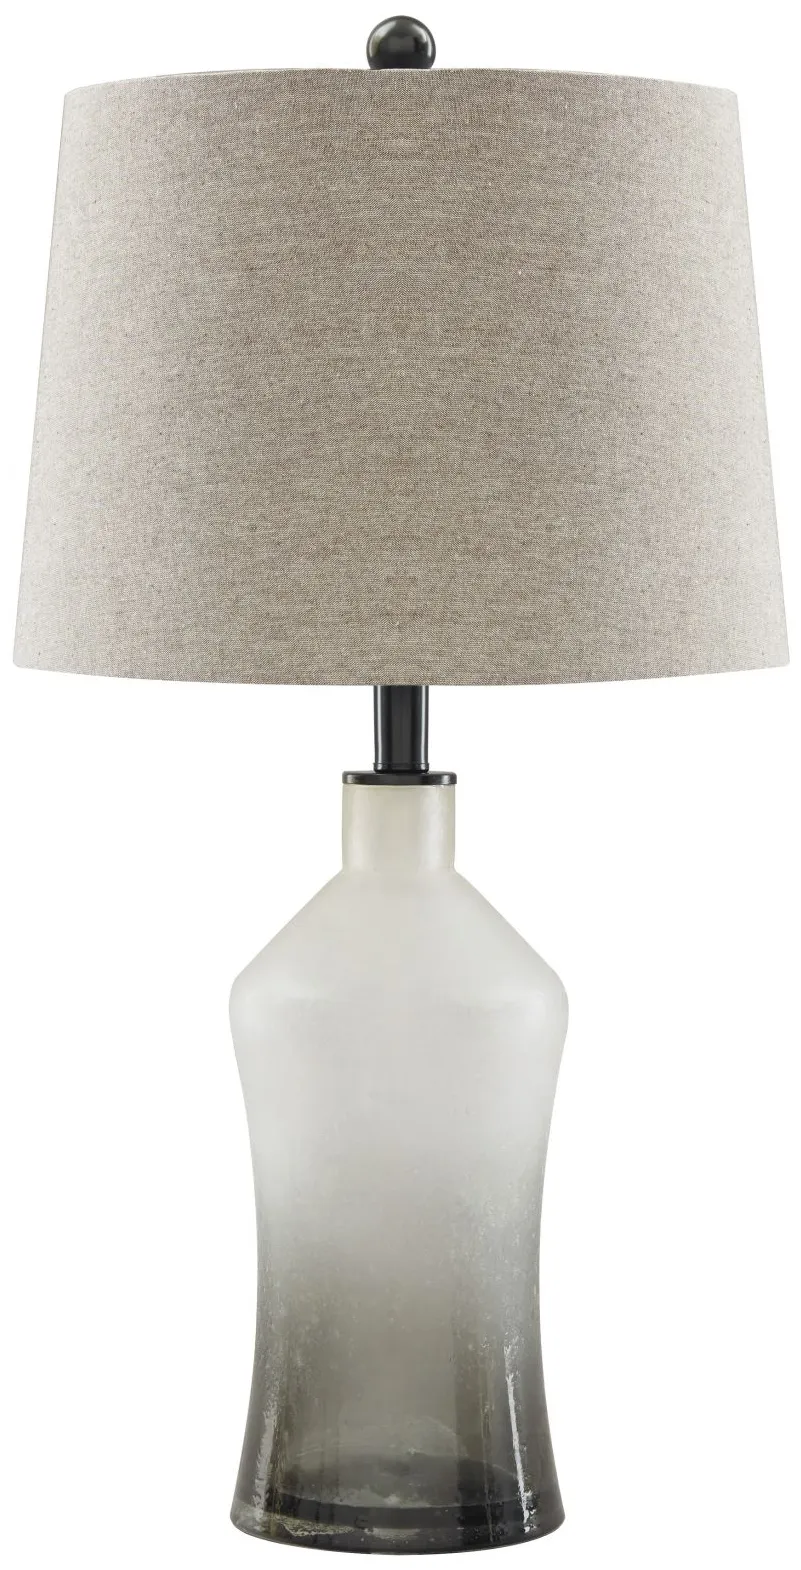 Nollie Glass Table Lamp Set of 2 by Ashley